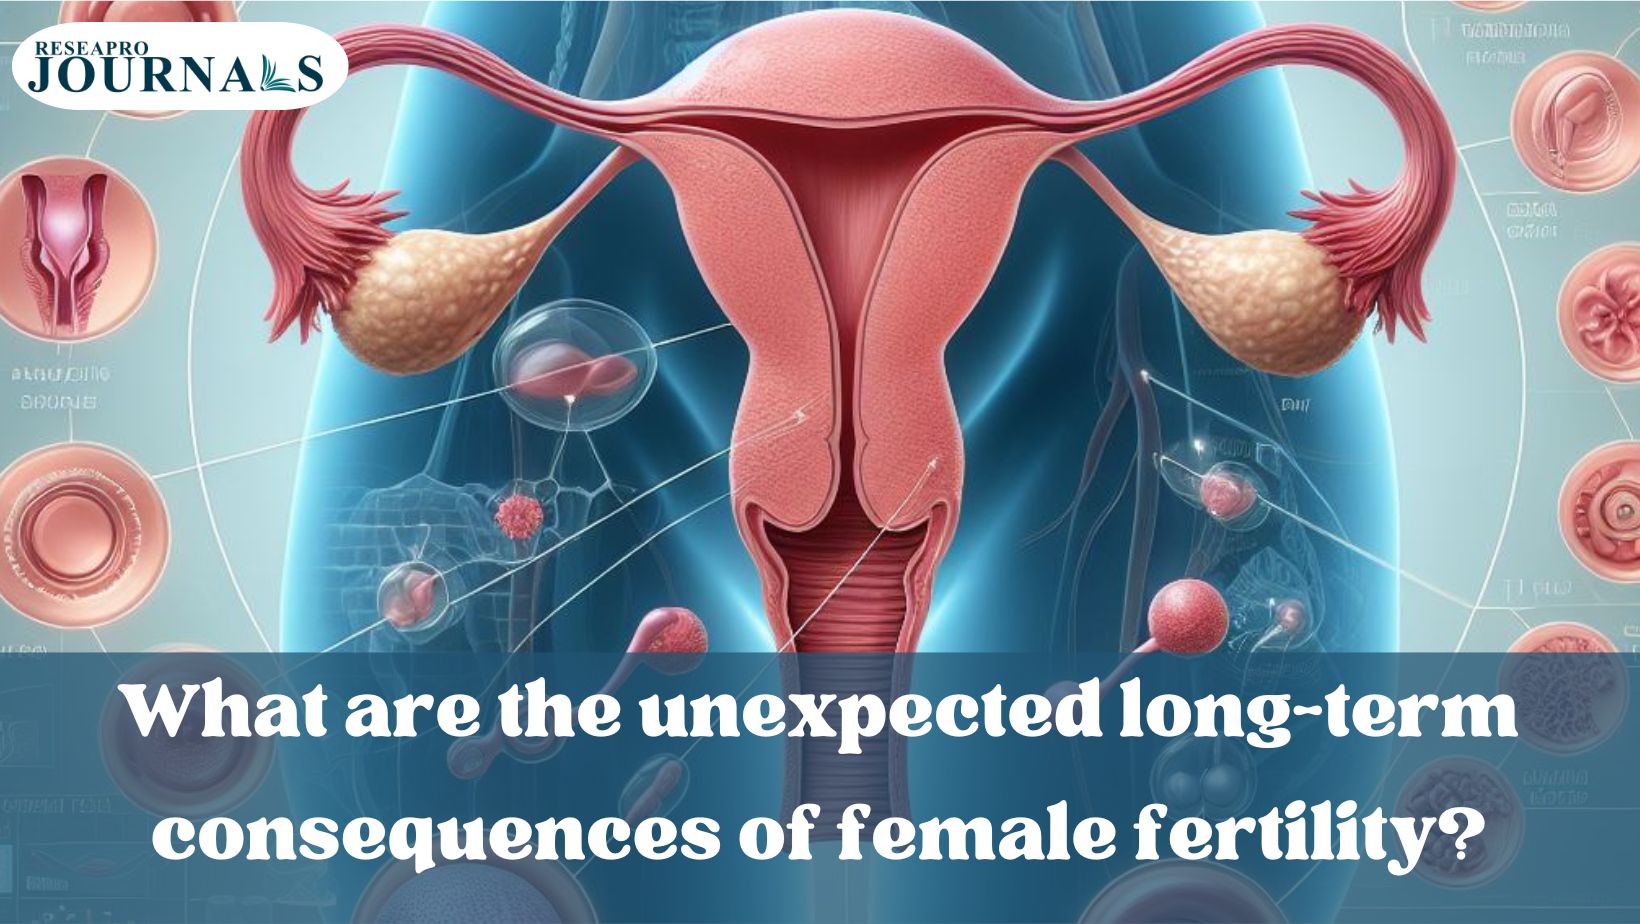 Female fertility’s long-term impacts: health, hormones, and well-being.